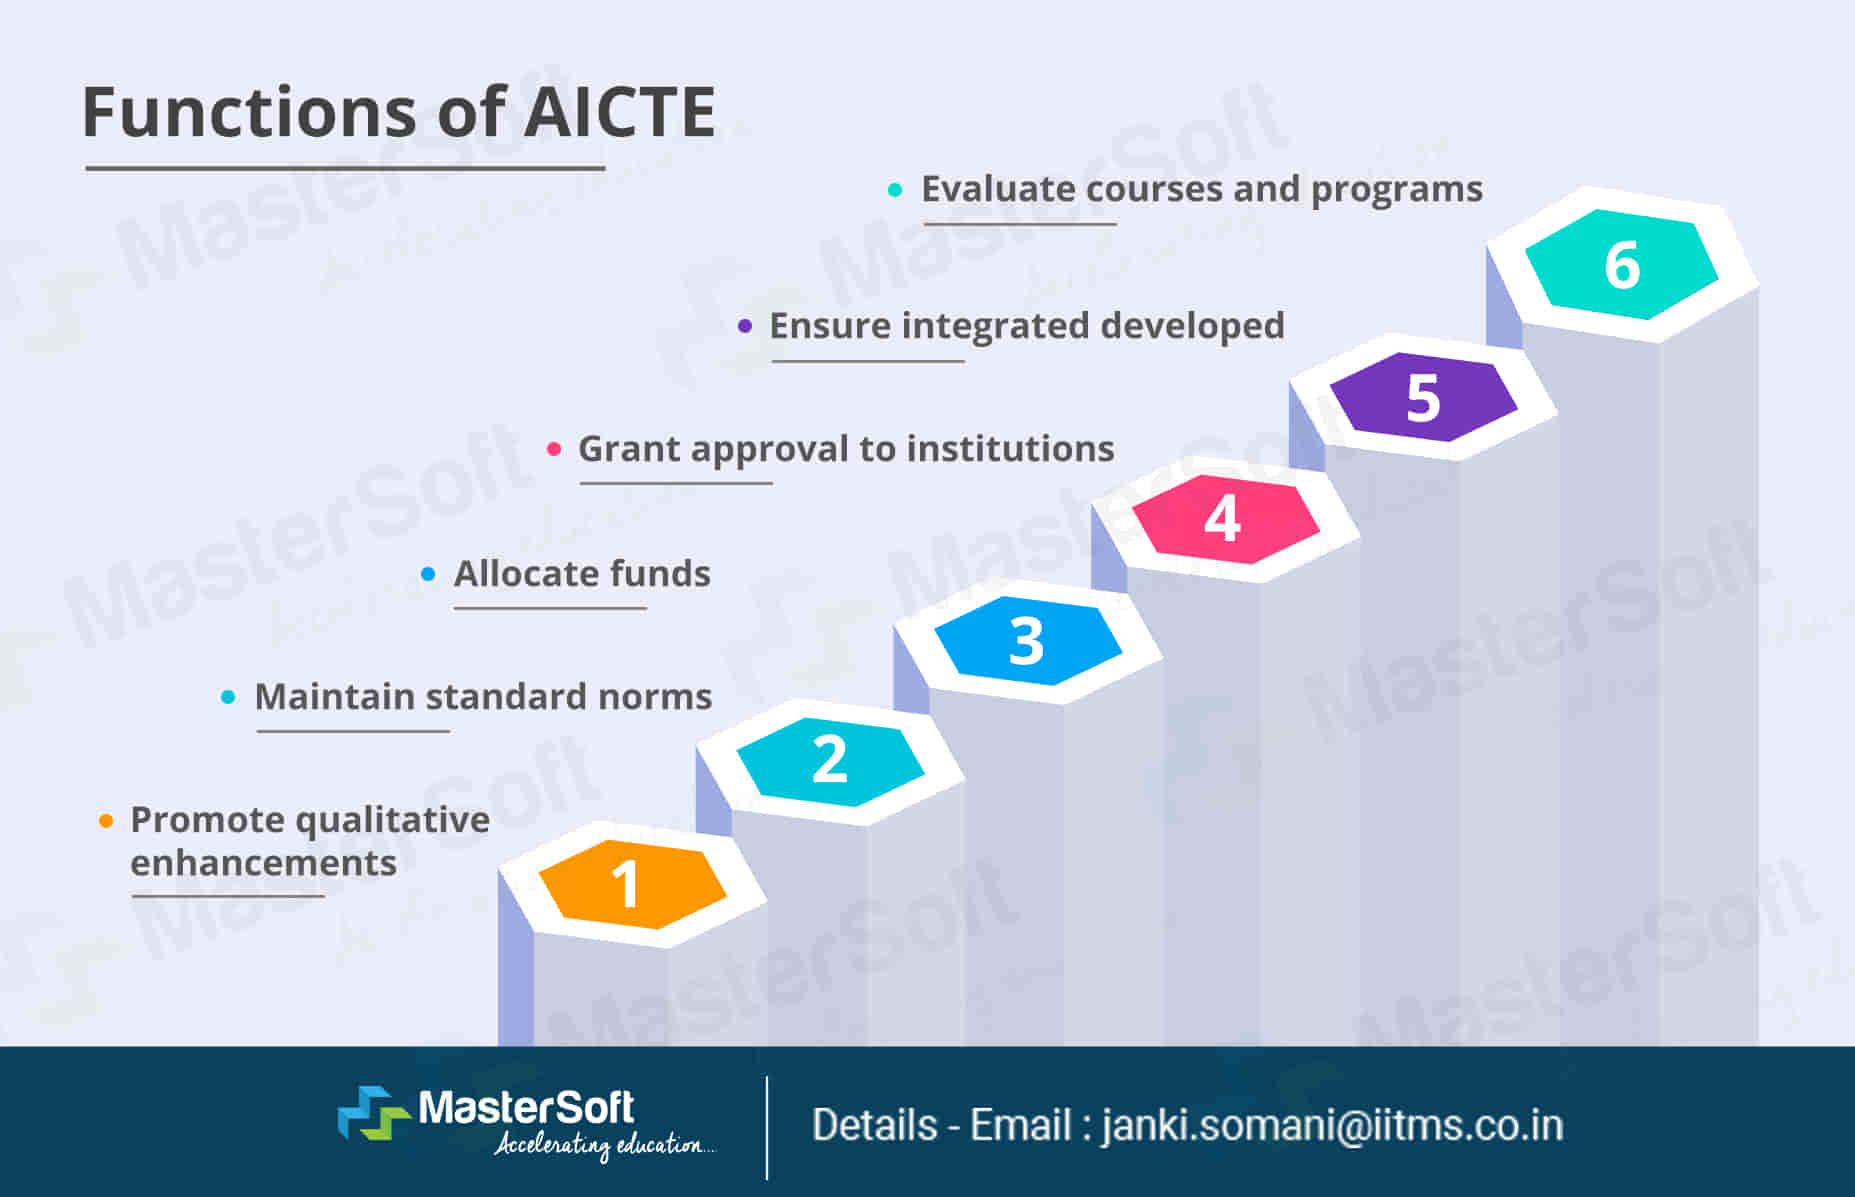 Functions of AICTE